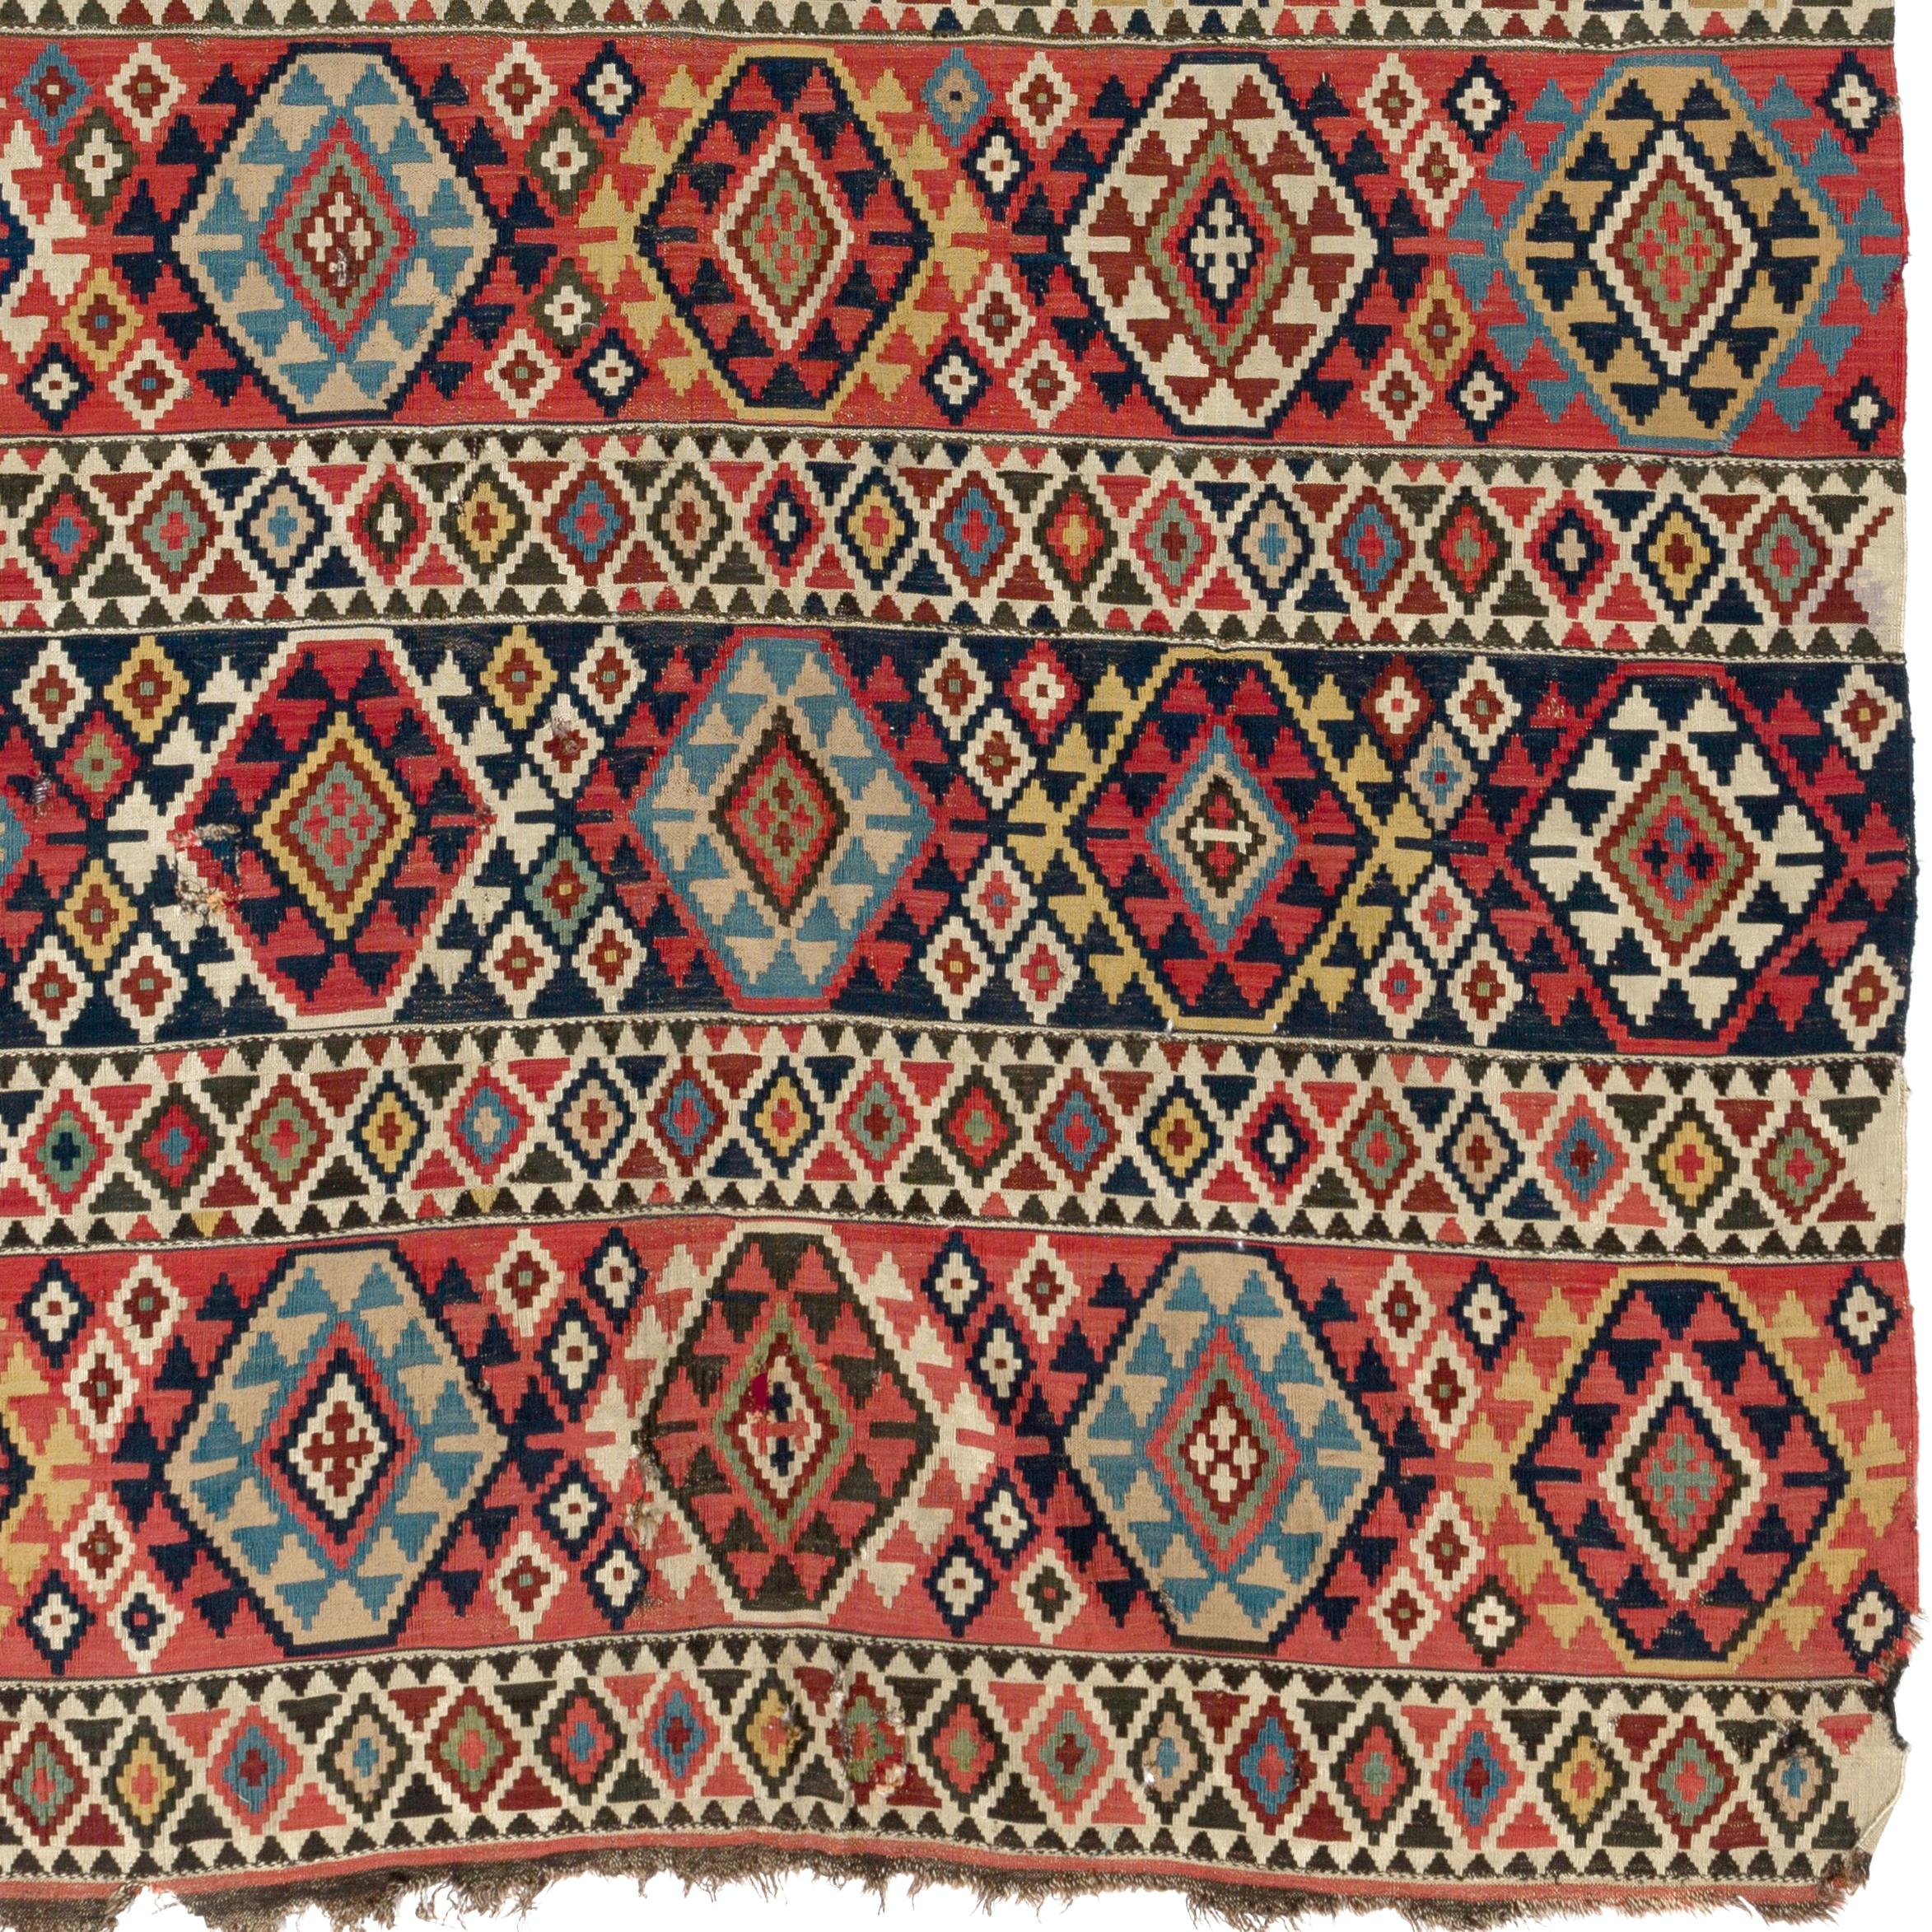 19th Century 5.2x10 Ft Antique Caucasian Shirvan Kilim Rug, Ca 1870, 100% Wool & Natural Dyes For Sale